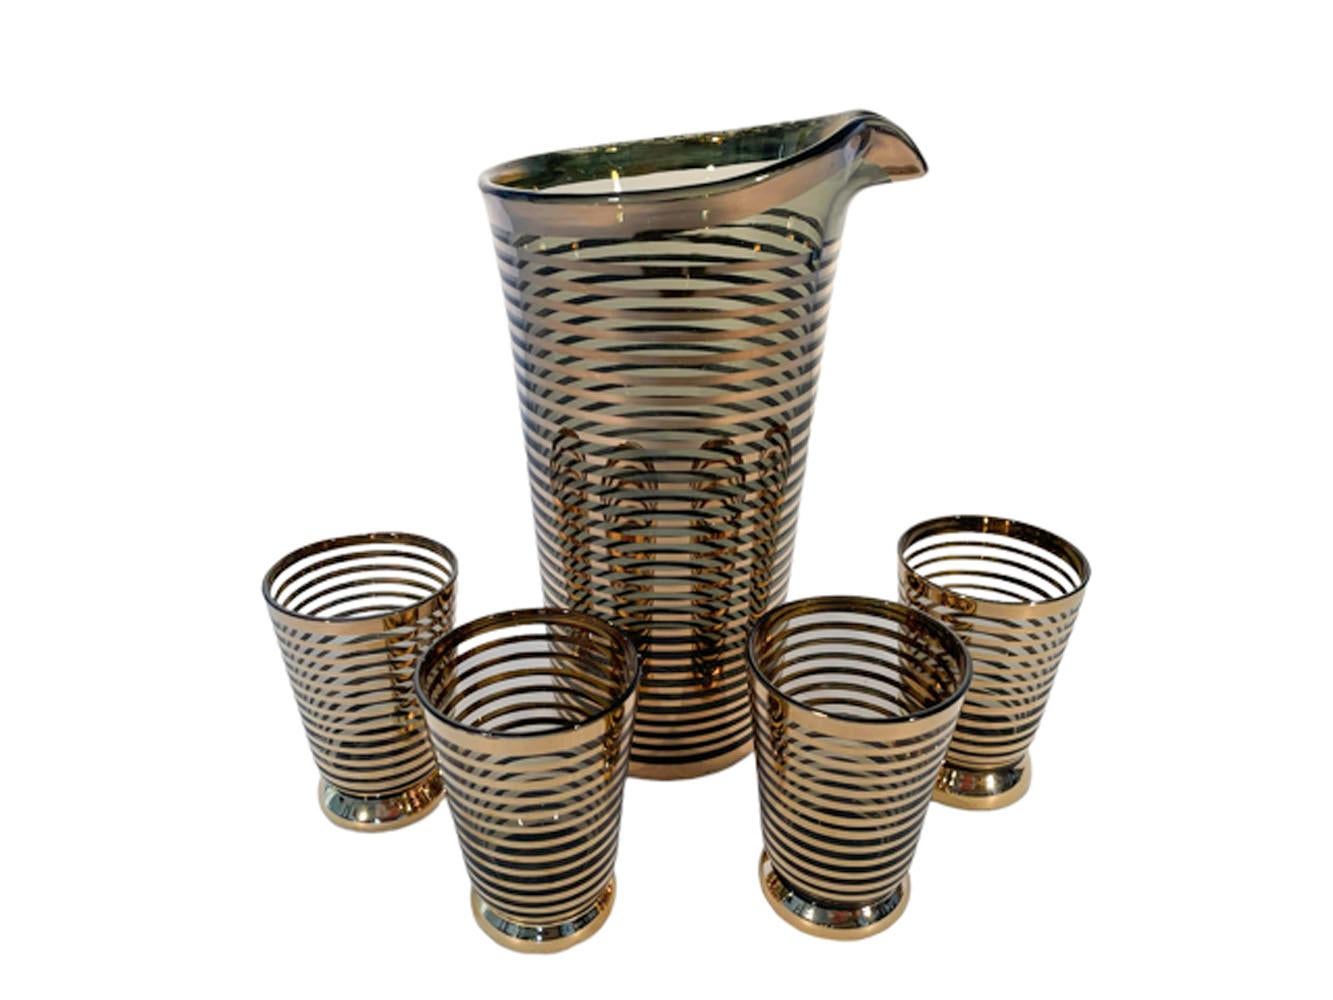 Five piece Mid-Century Modern cocktail set consisting of a handless cocktail pitcher with polished pontil and 4 footed cocktail glasses, in olive glass with 22k gold micro bands from bottom to top.